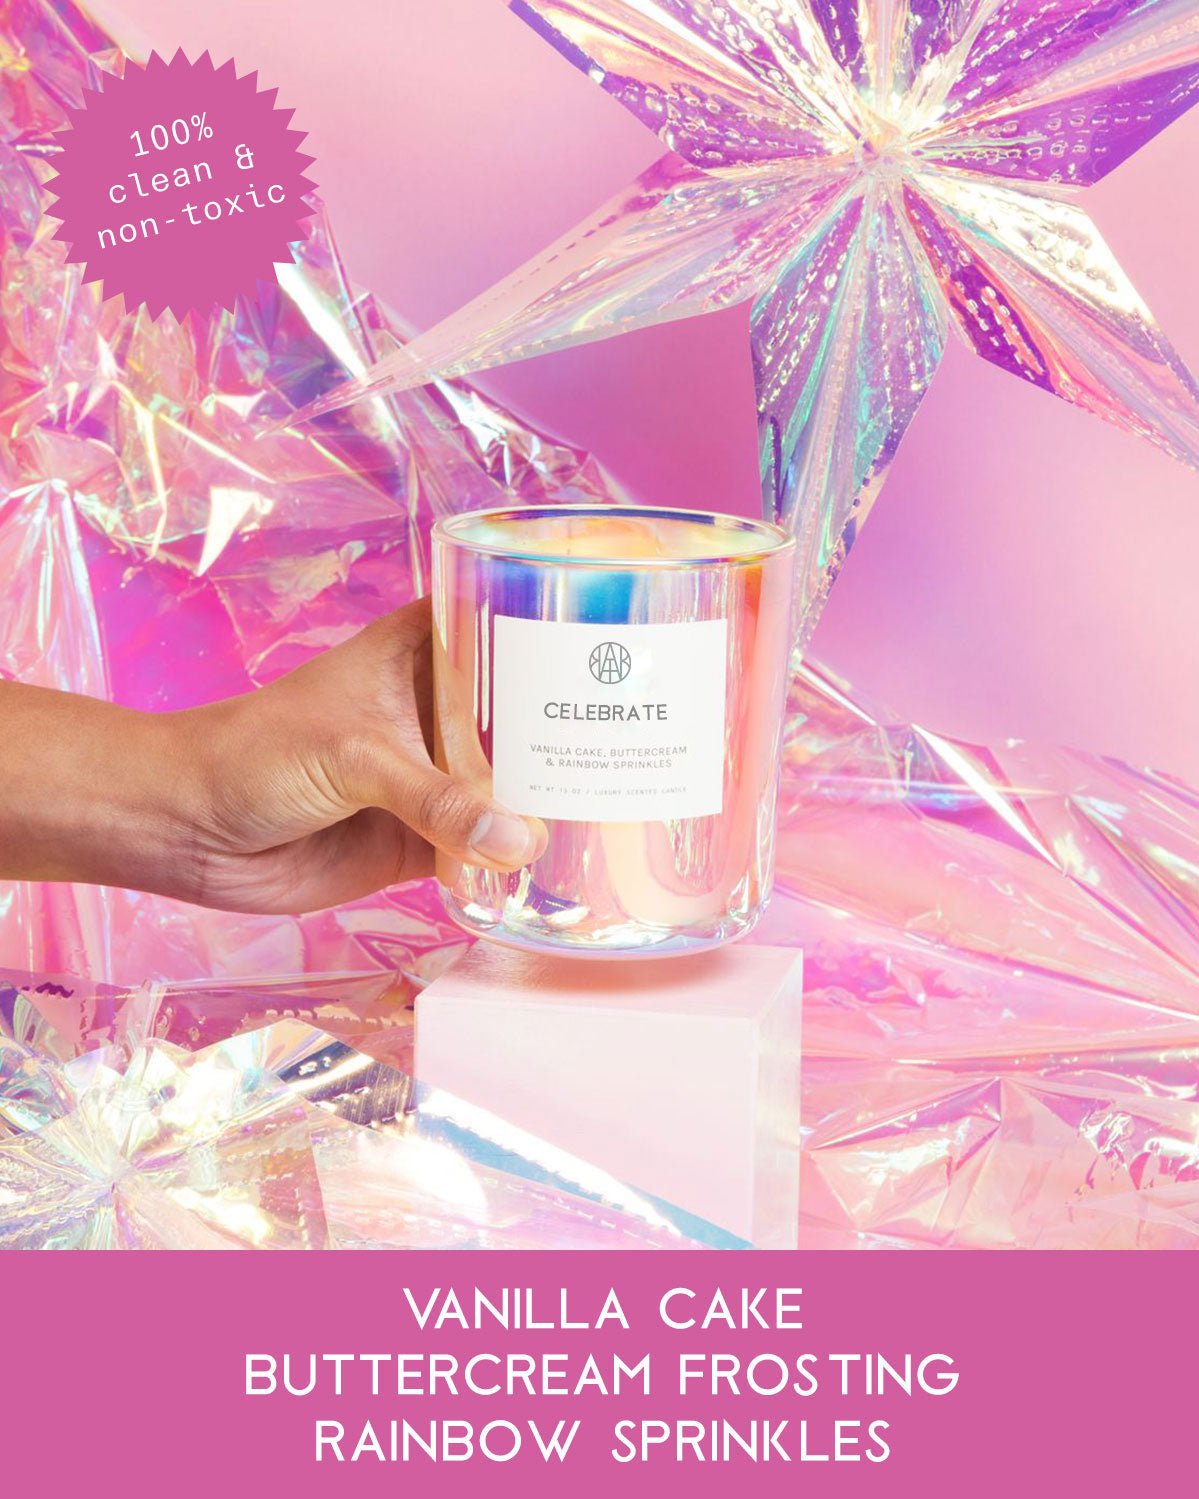 CELEBRATE - Deluxe Iridescent Candle - AEMBR - Clean Luxury Candles, Wax Melts & Laundry Care